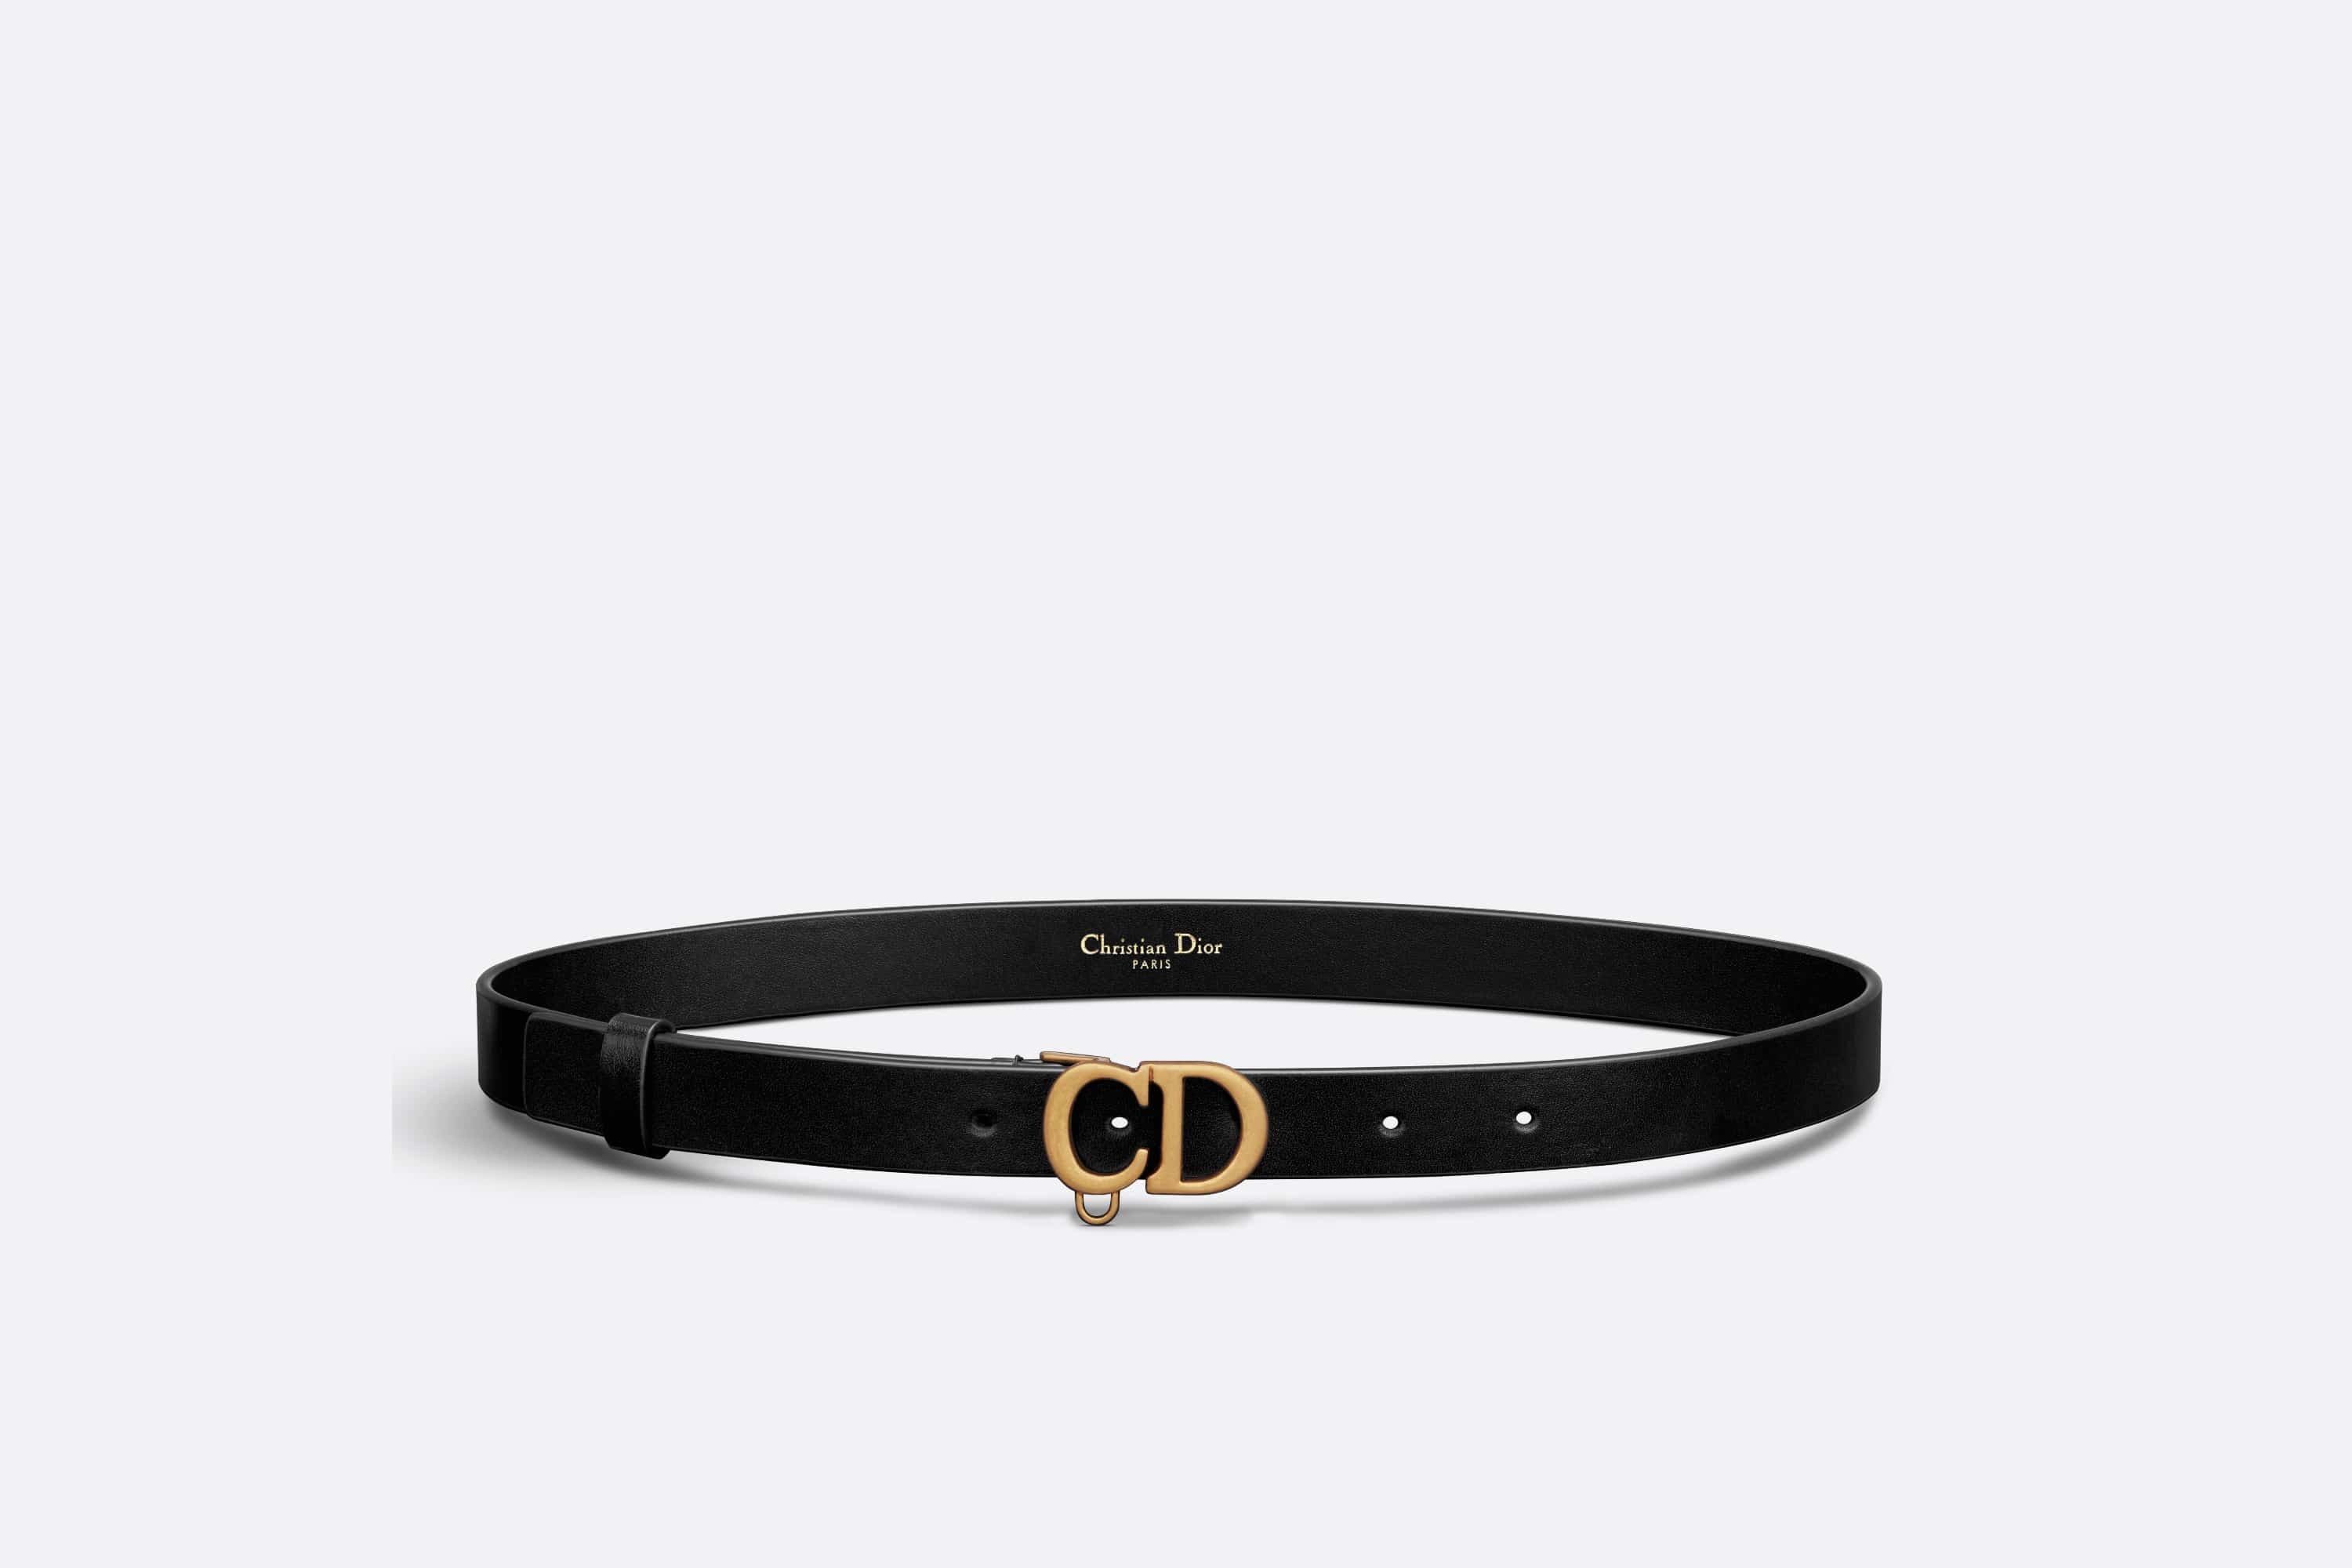 Dior's Got A Cool Belt That Comes With A Removable Pouch